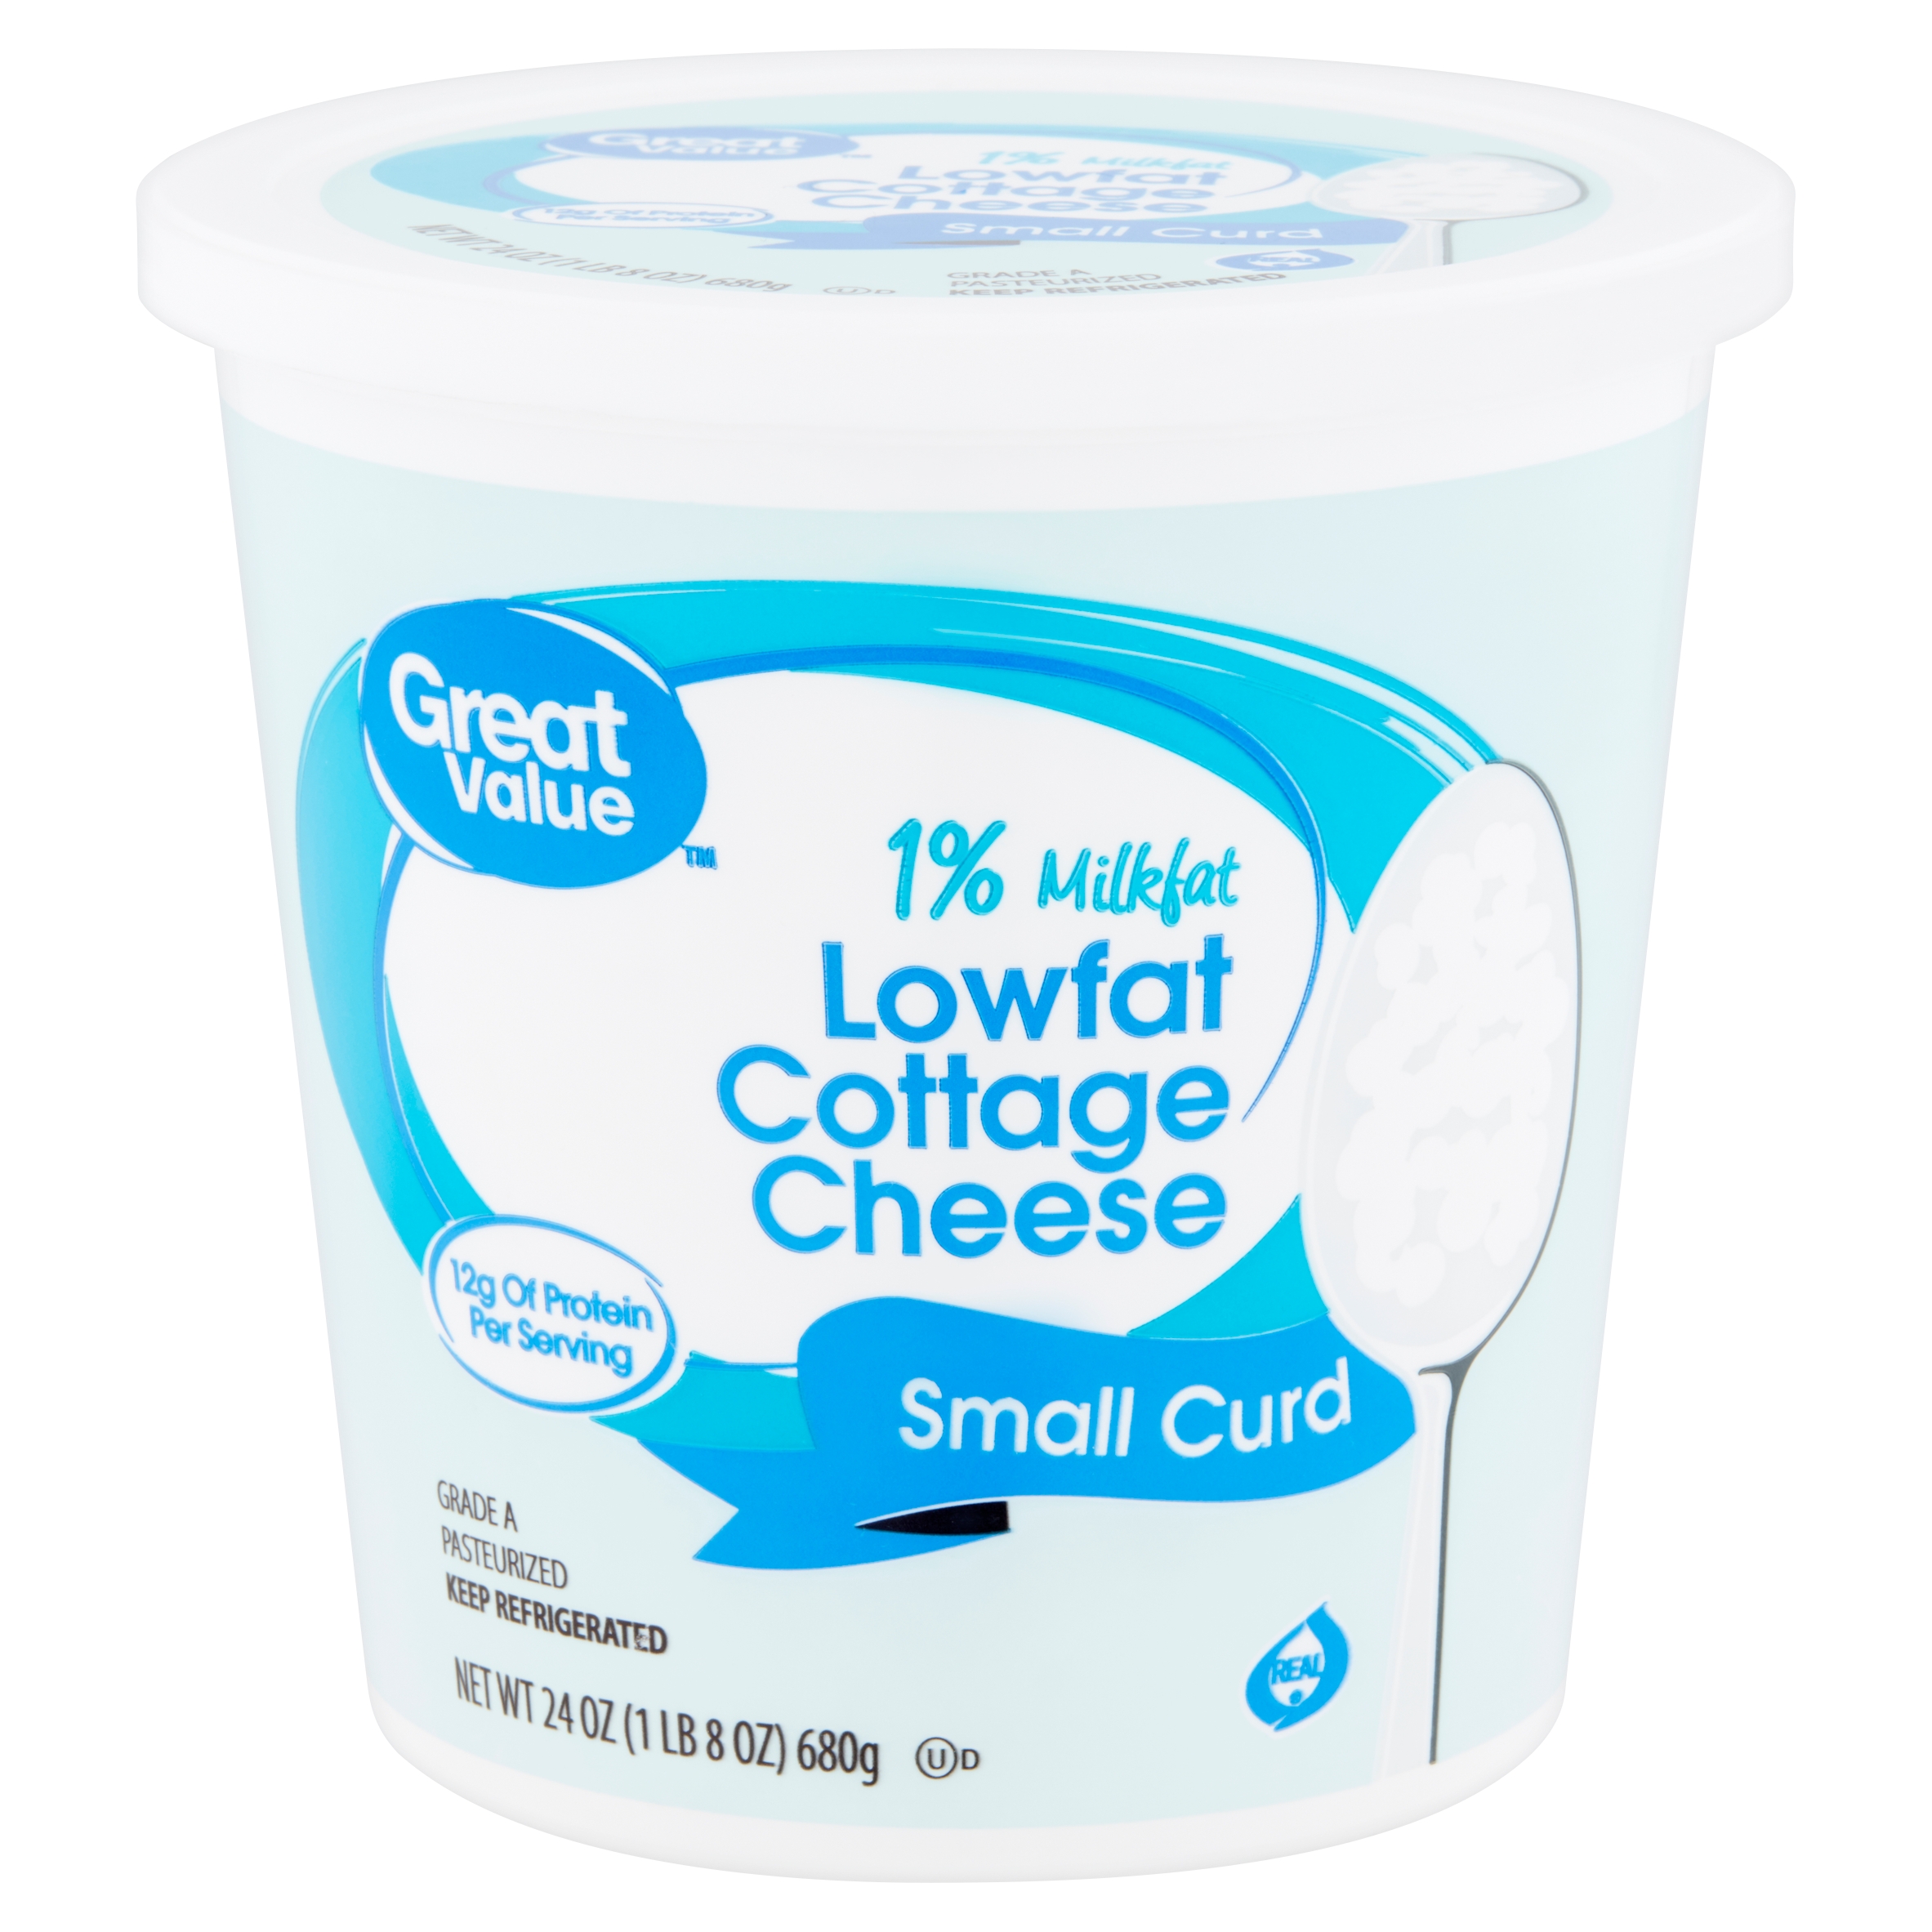 Great Value 1% Milkfat Lowfat Small Curd Cottage Cheese, 24 Oz Image